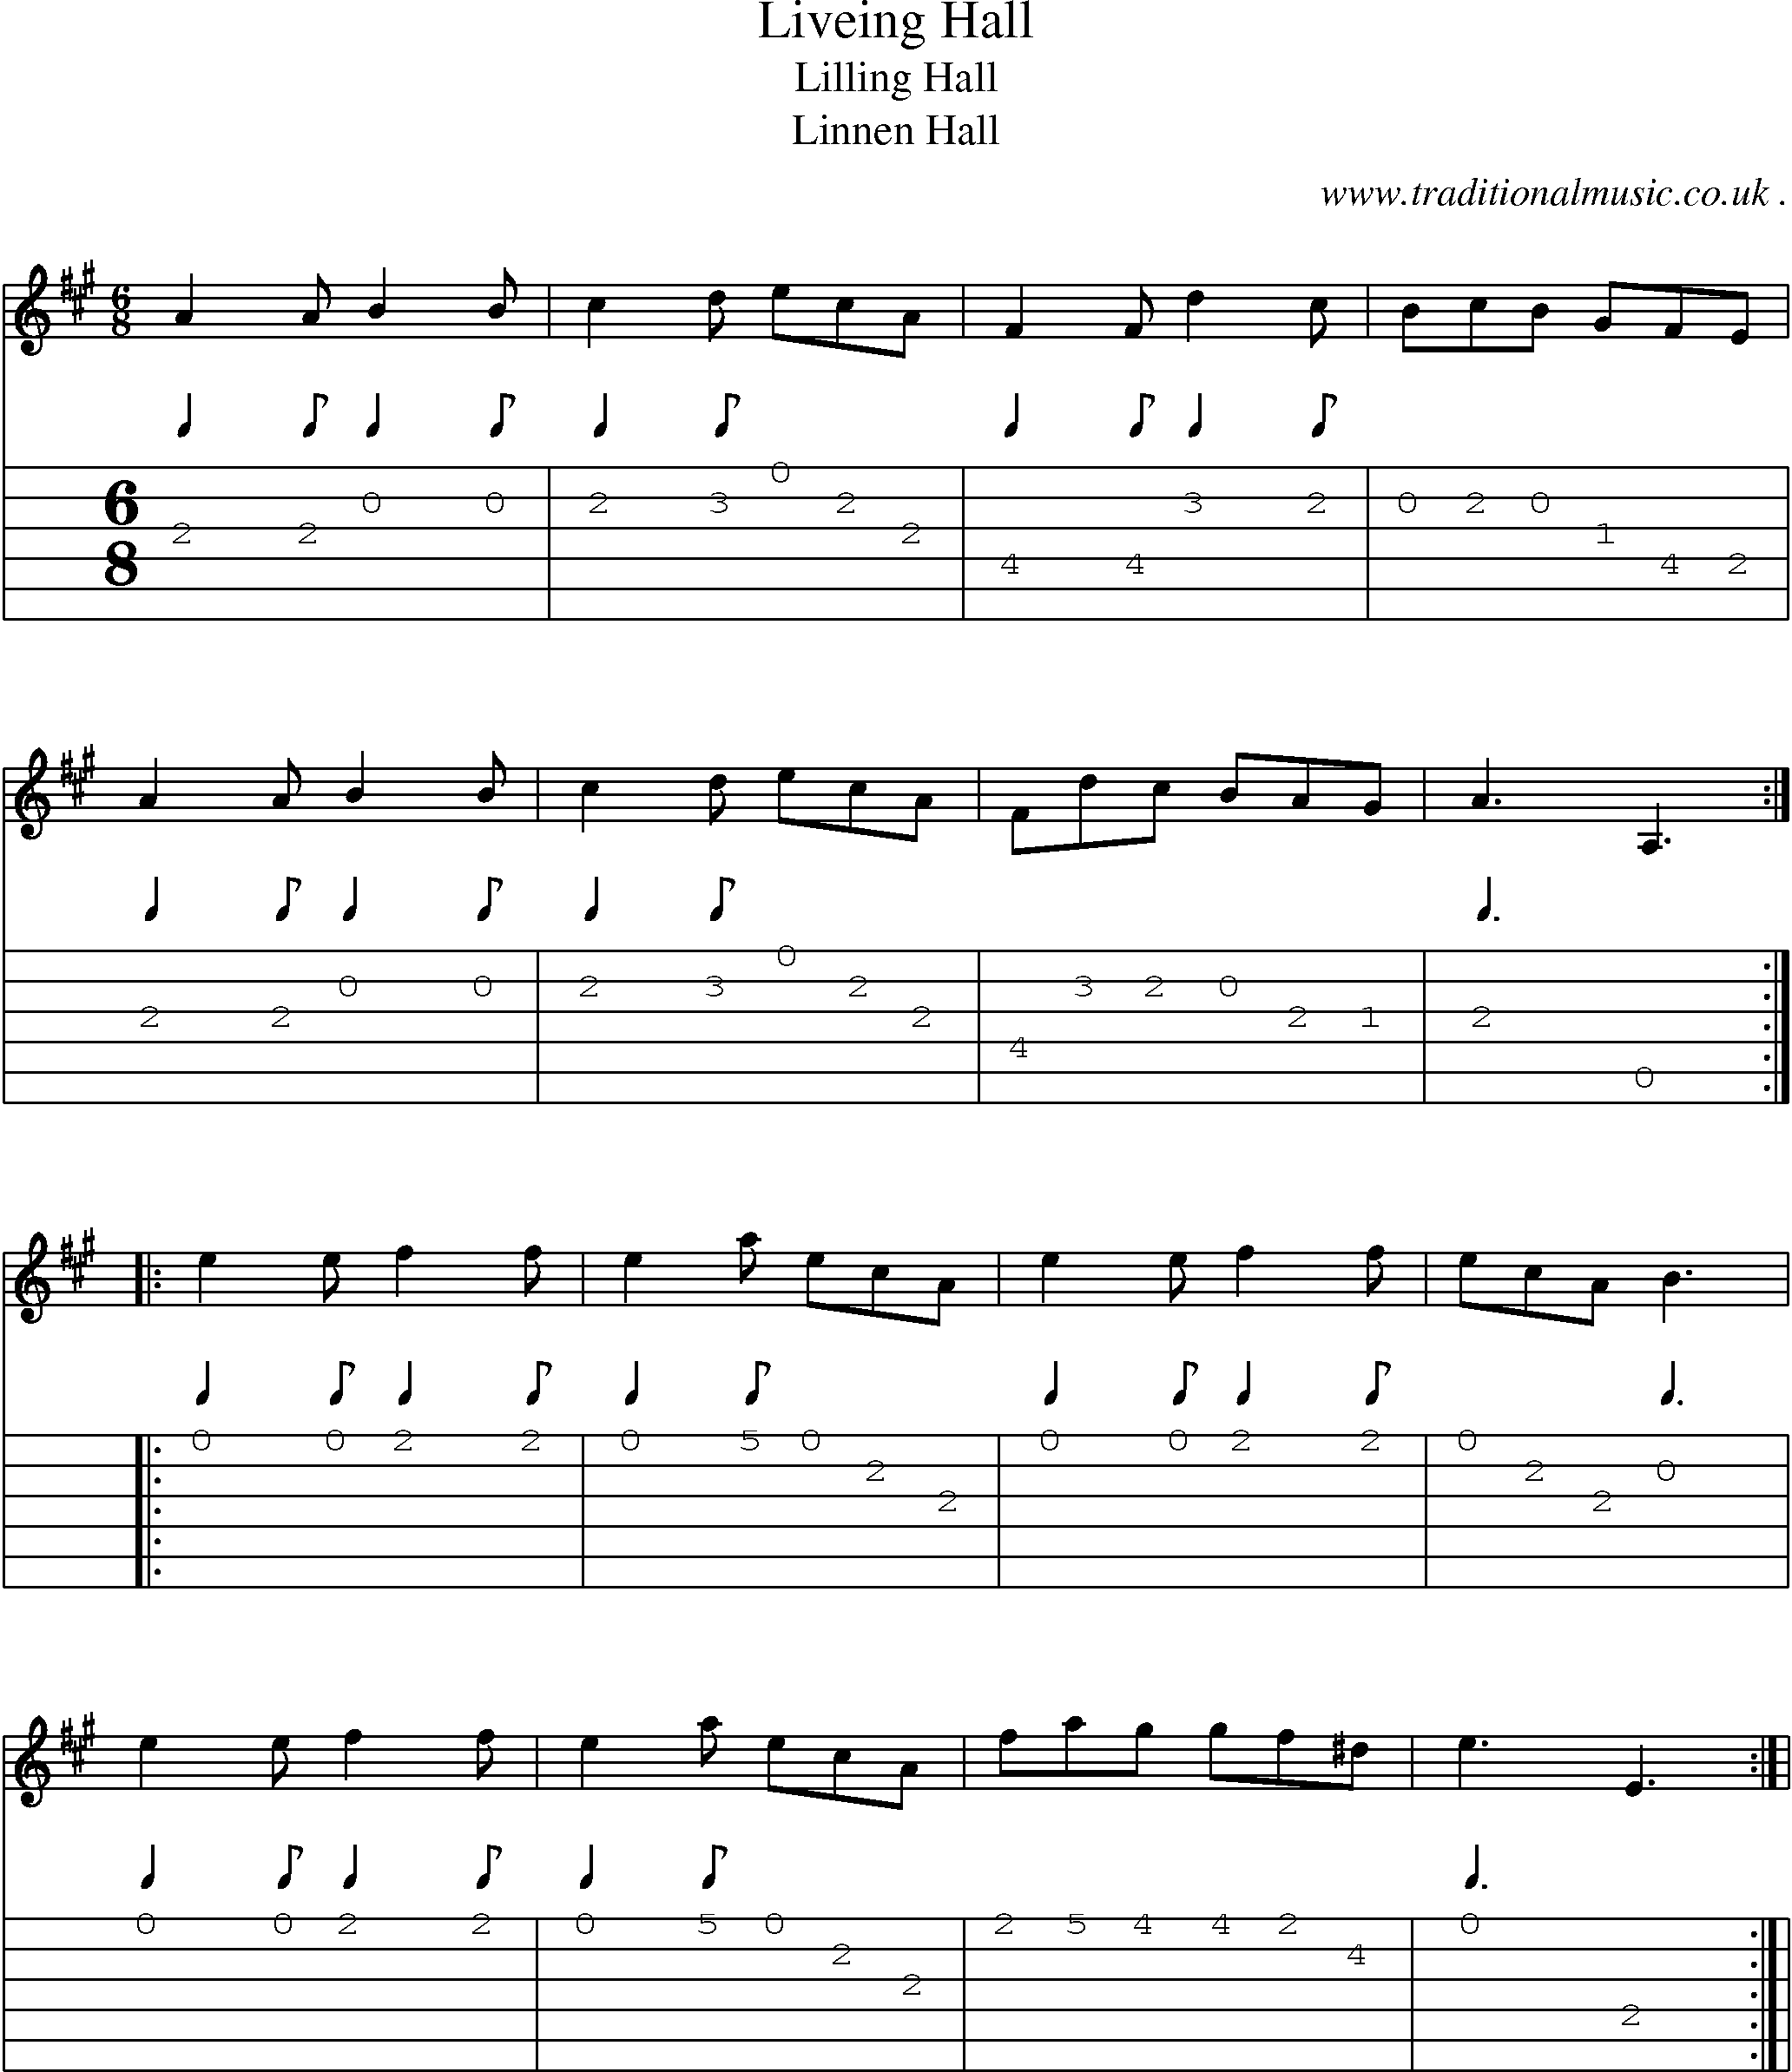 Sheet-Music and Guitar Tabs for Liveing Hall